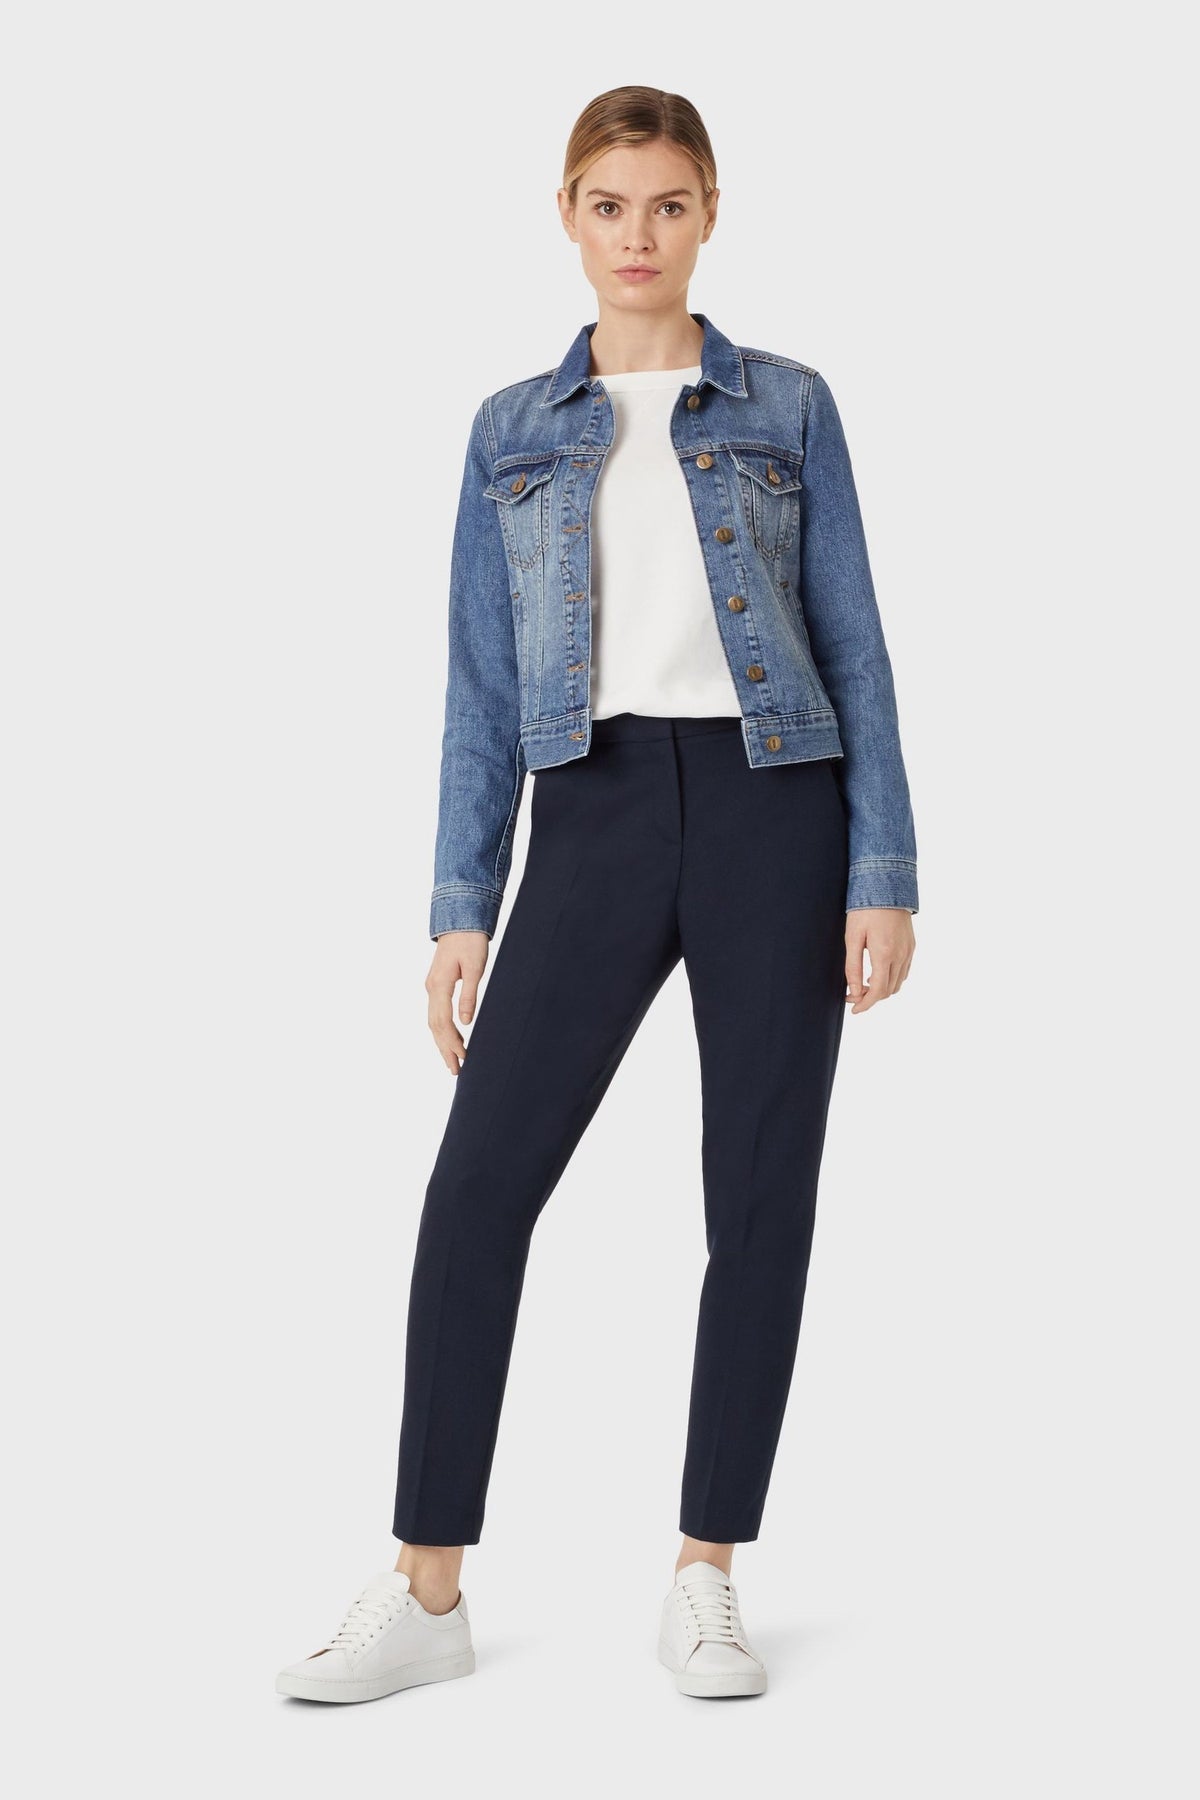 Classic blue denim jacket from Ace Cart's collection, worn with white top and black pants. Versatile and stylish outfit perfect for everyday wear.